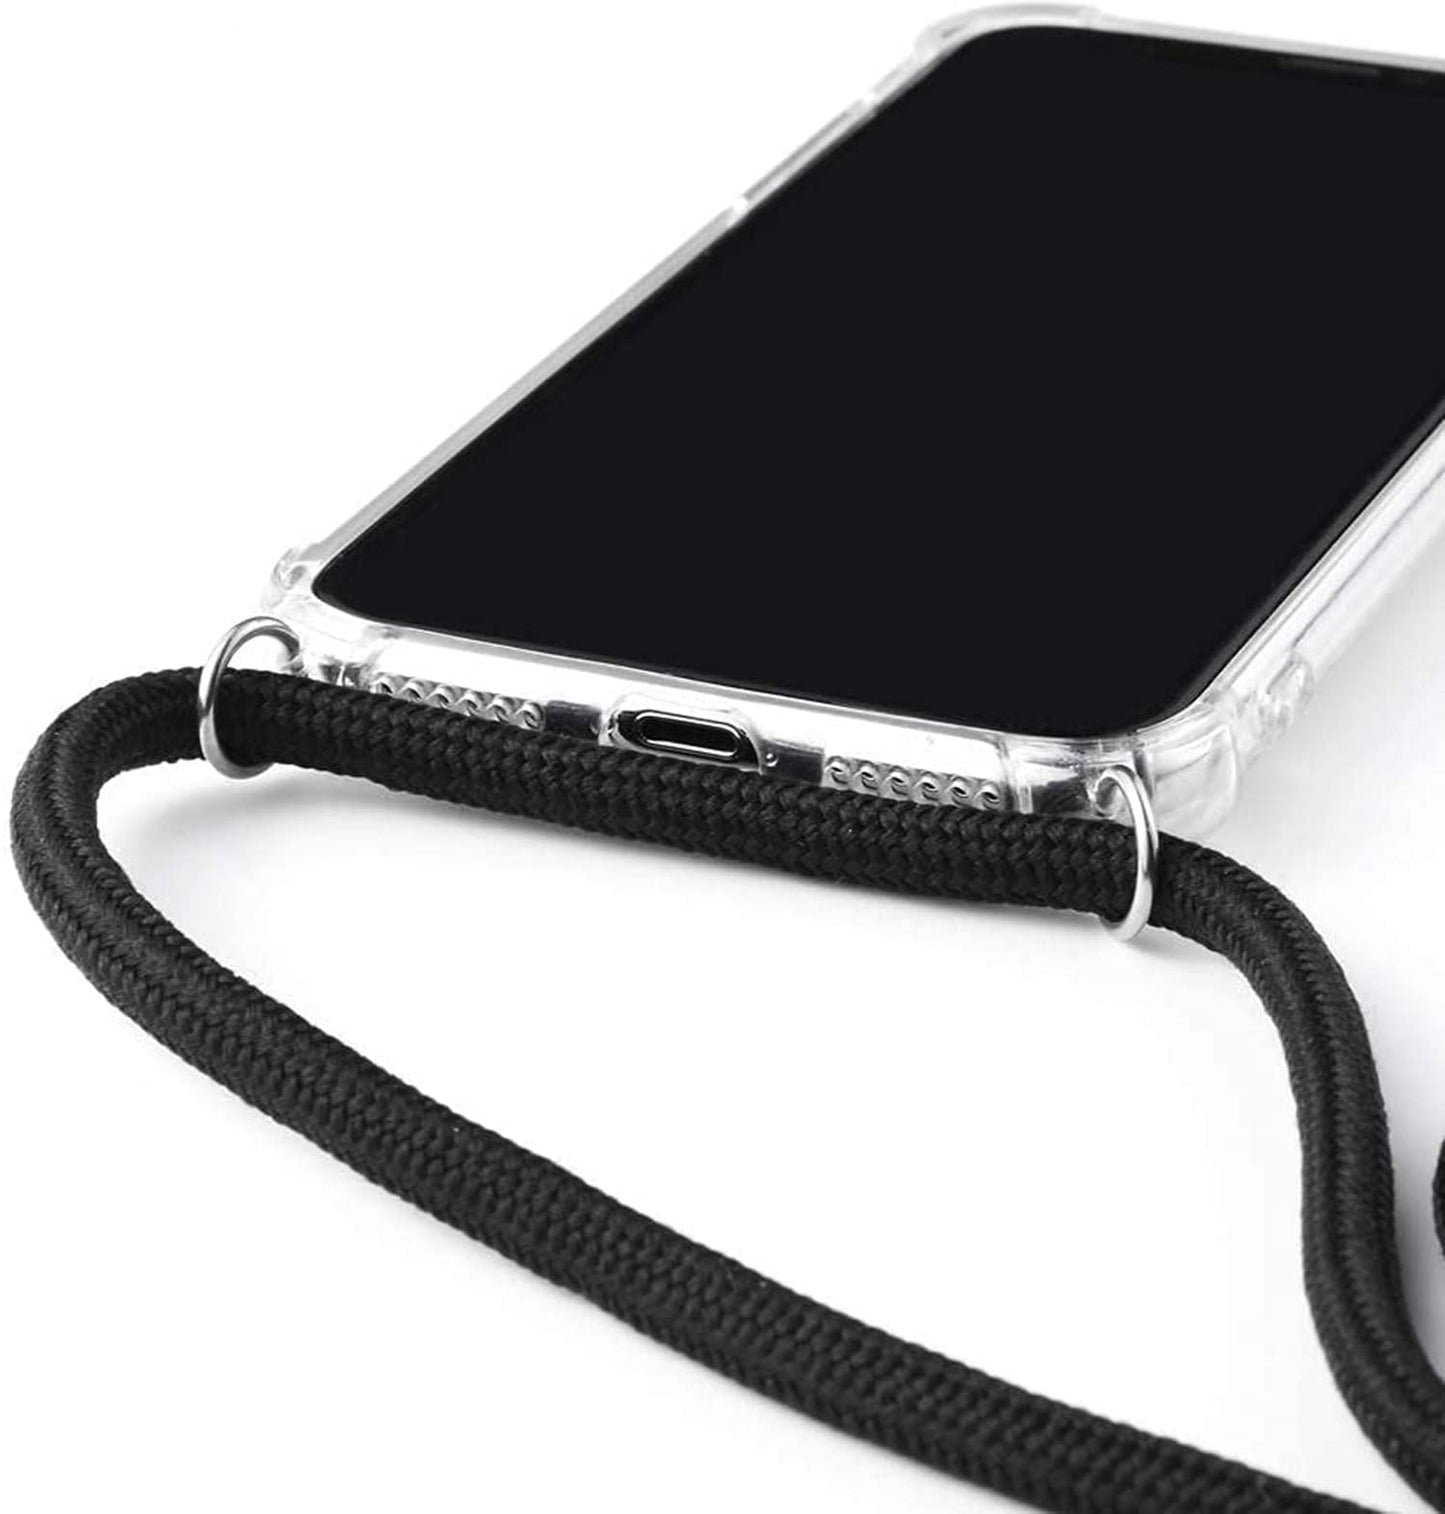 ELECDON- Cases Cover with Lanyard Strap Cord Chain for iPhone 12 Pro Case, Mobile Phone Crossbody Necklace Stylish Hang Holder for iPhone 12/12 Pro Easy to Carry Crossbody Phone Bumper